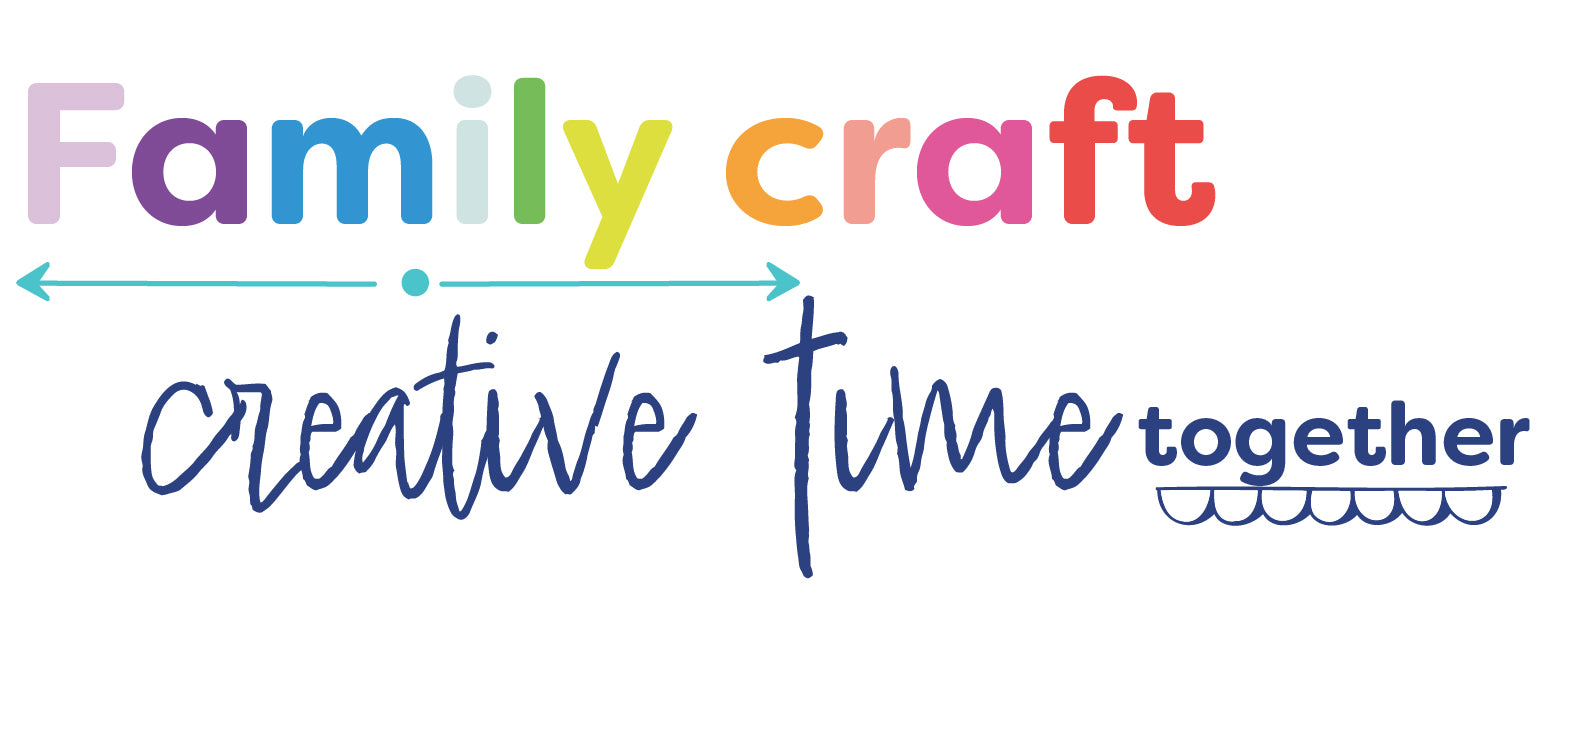 Crafting as a Family: 5 DIY Projects for Creative Bonding Moments